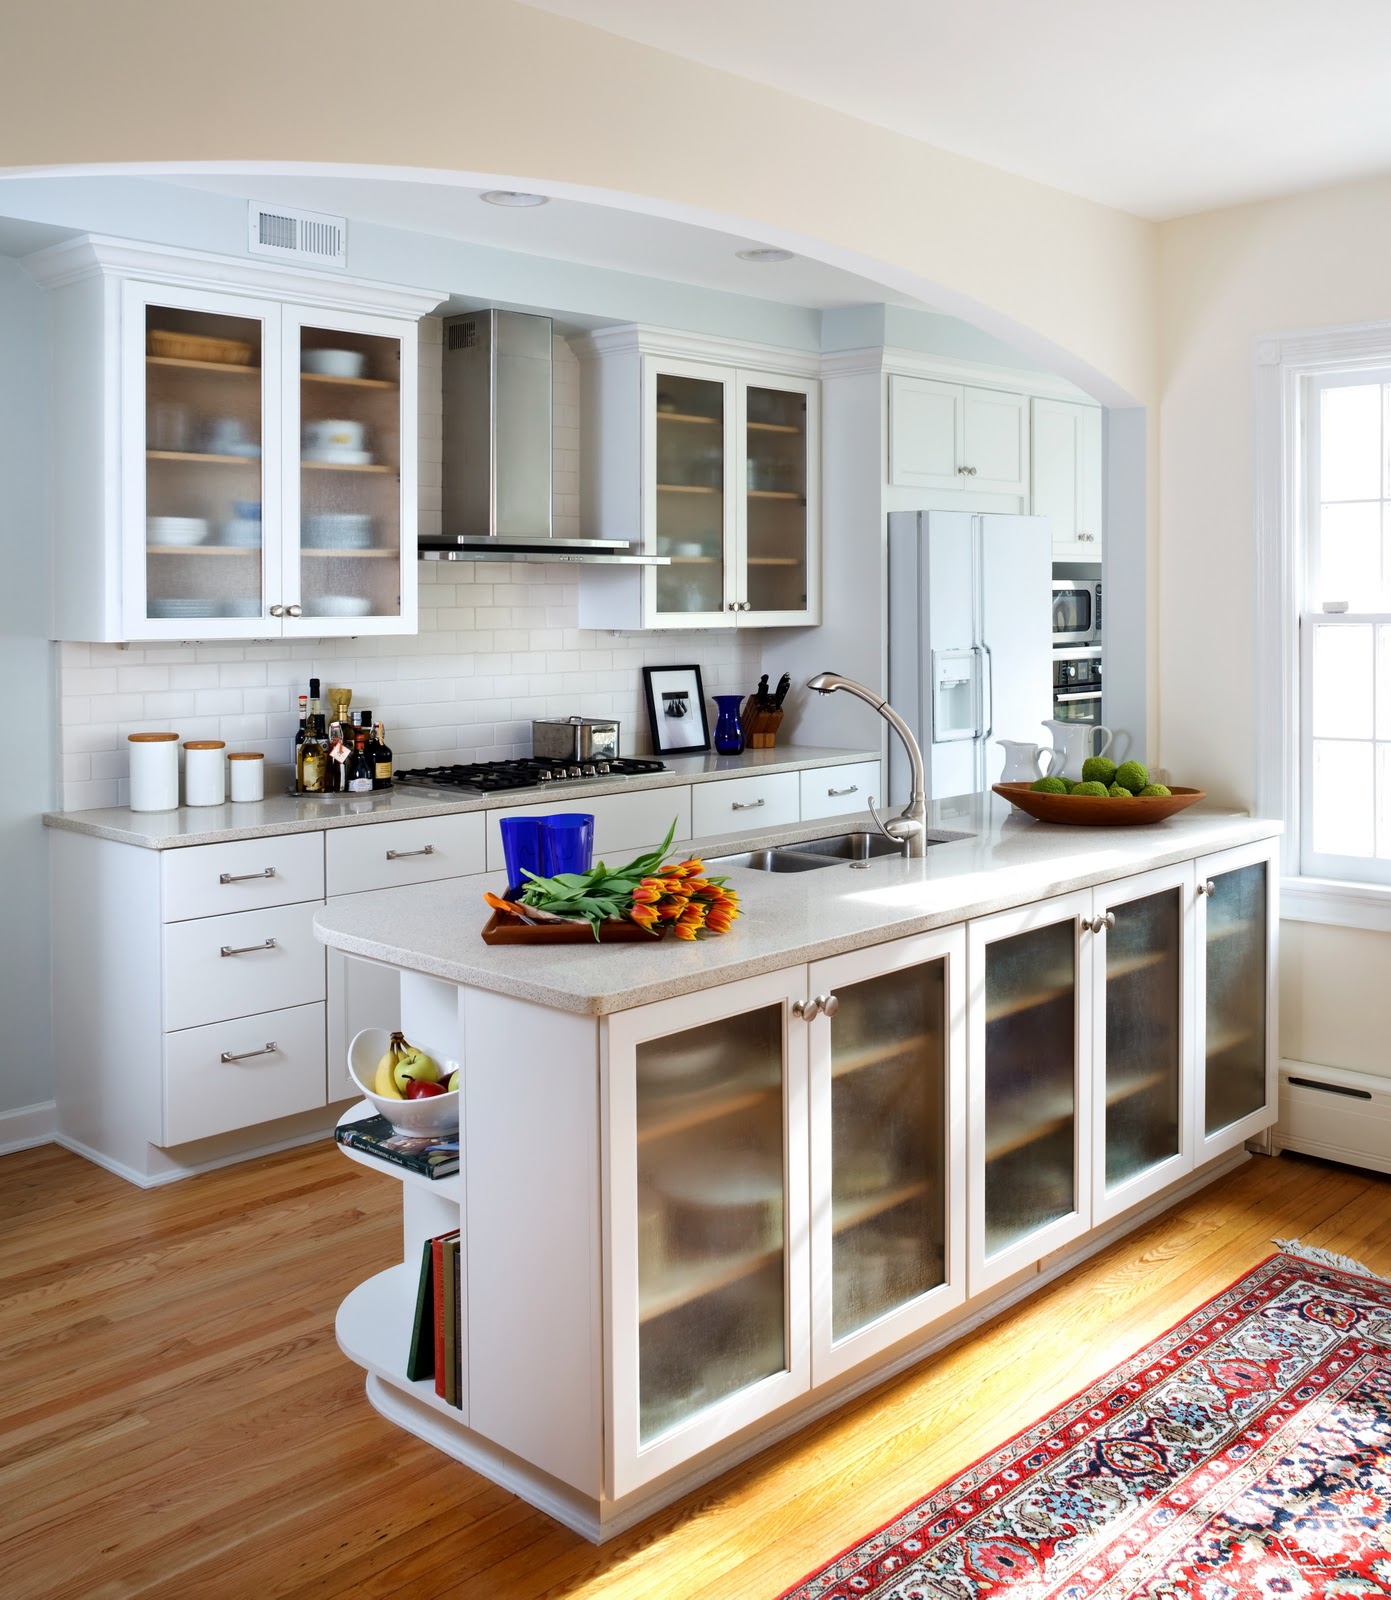 Ask the Architect: Doing More with Less: A Townhouse Kitchen Remodel